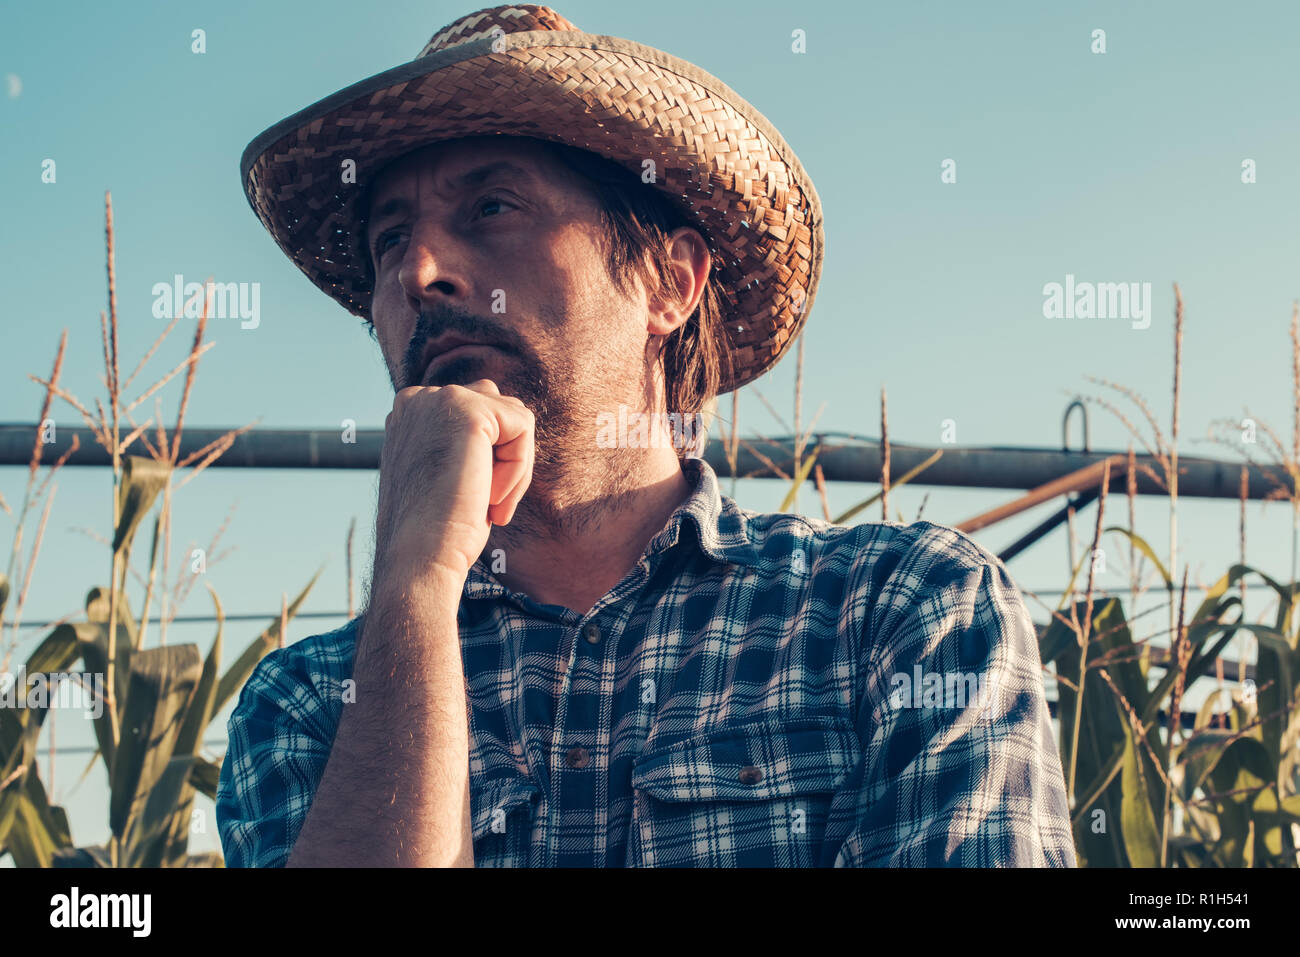 Serious confident agronomist farmer planning agricutural activity in corn field, looking self-assured and determined Stock Photo